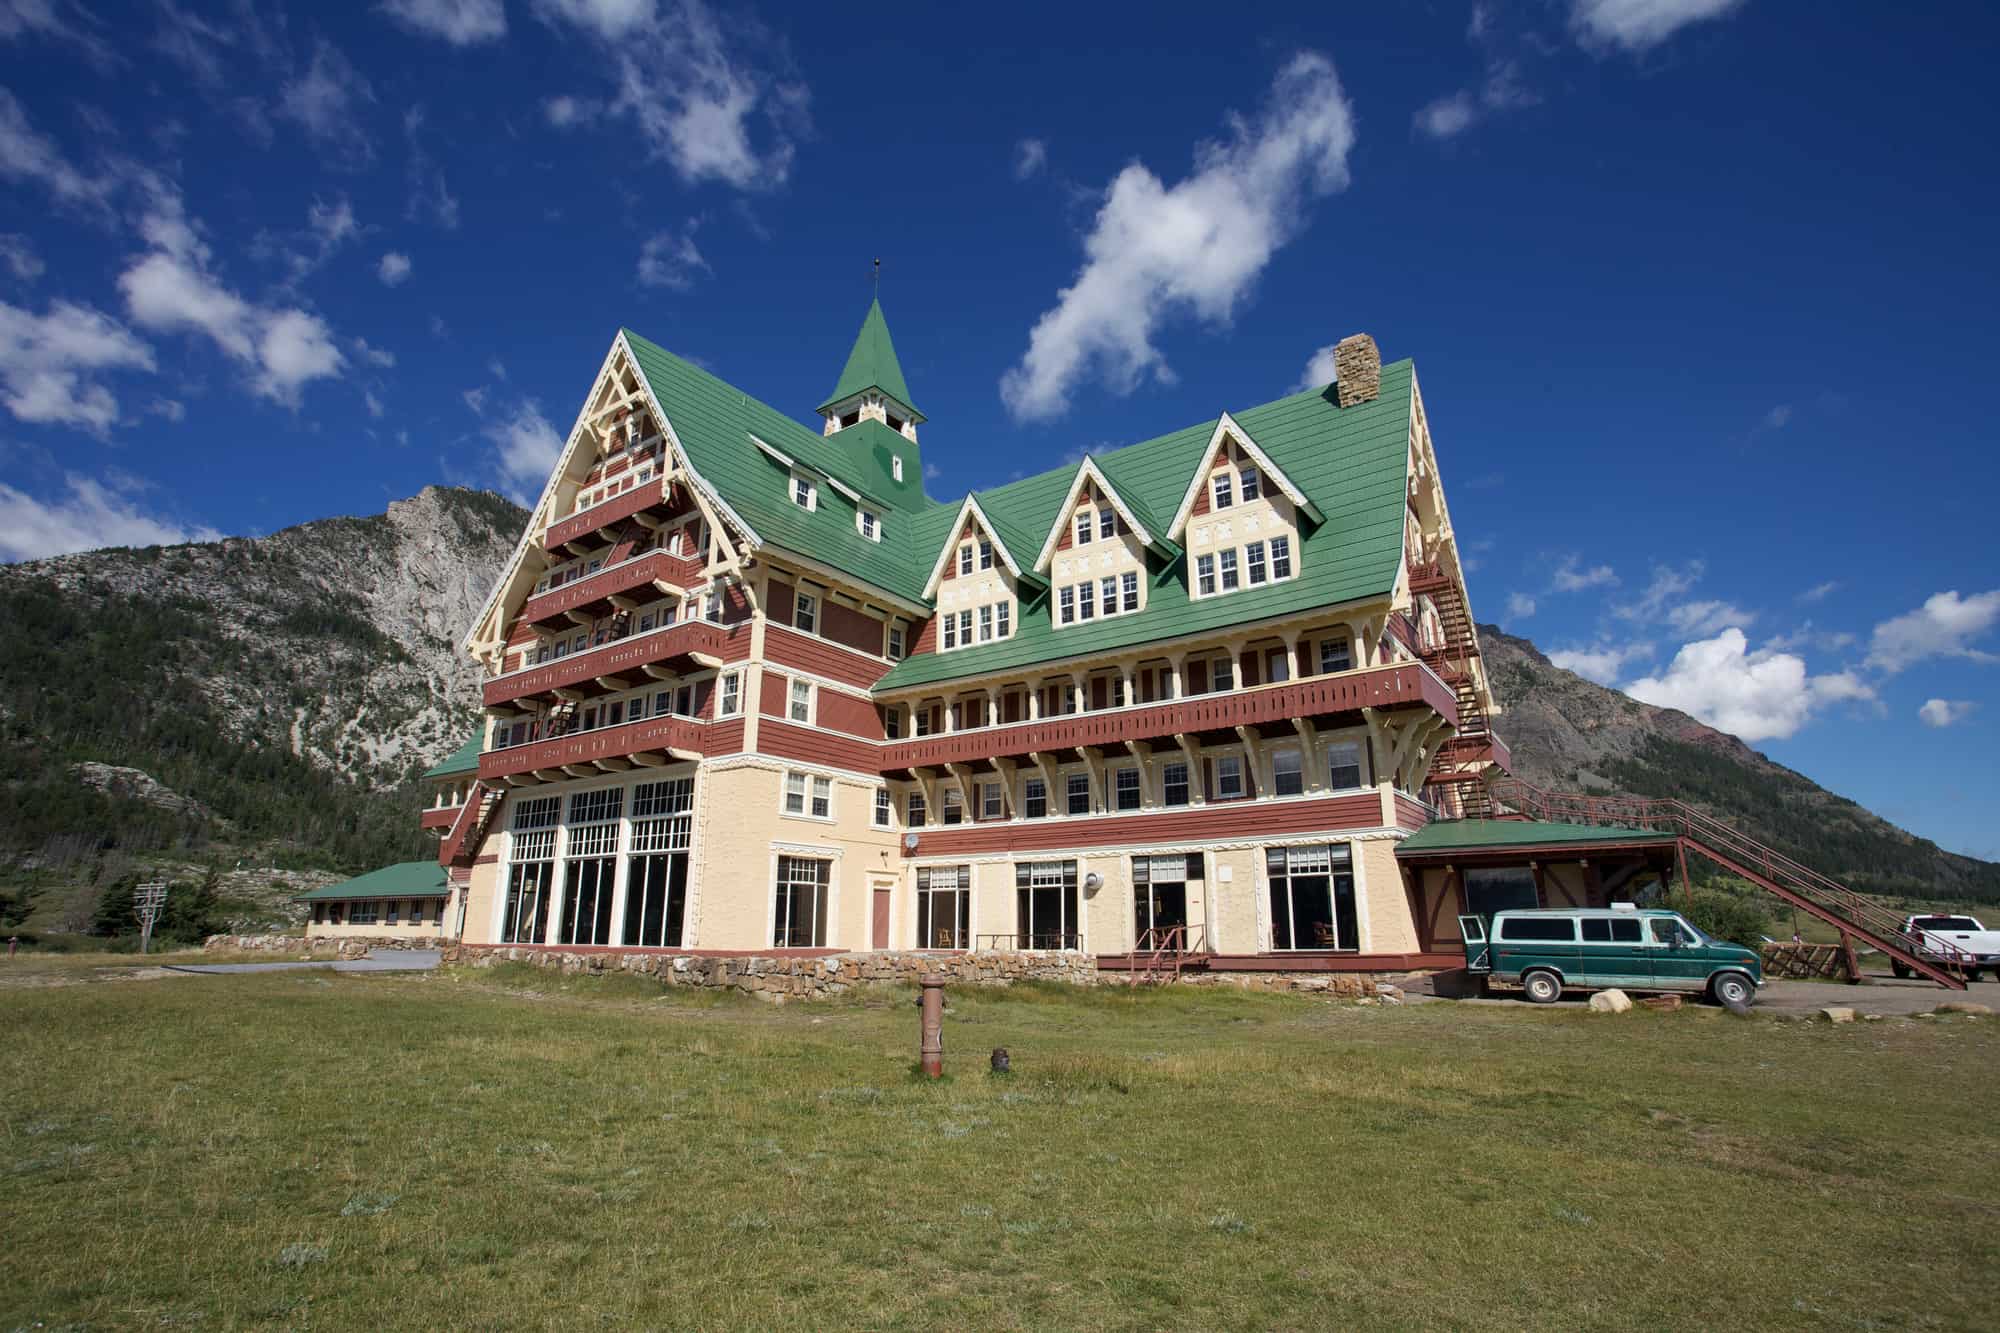 Prince of Wales Hotel am Ufer des Waterton Lakes